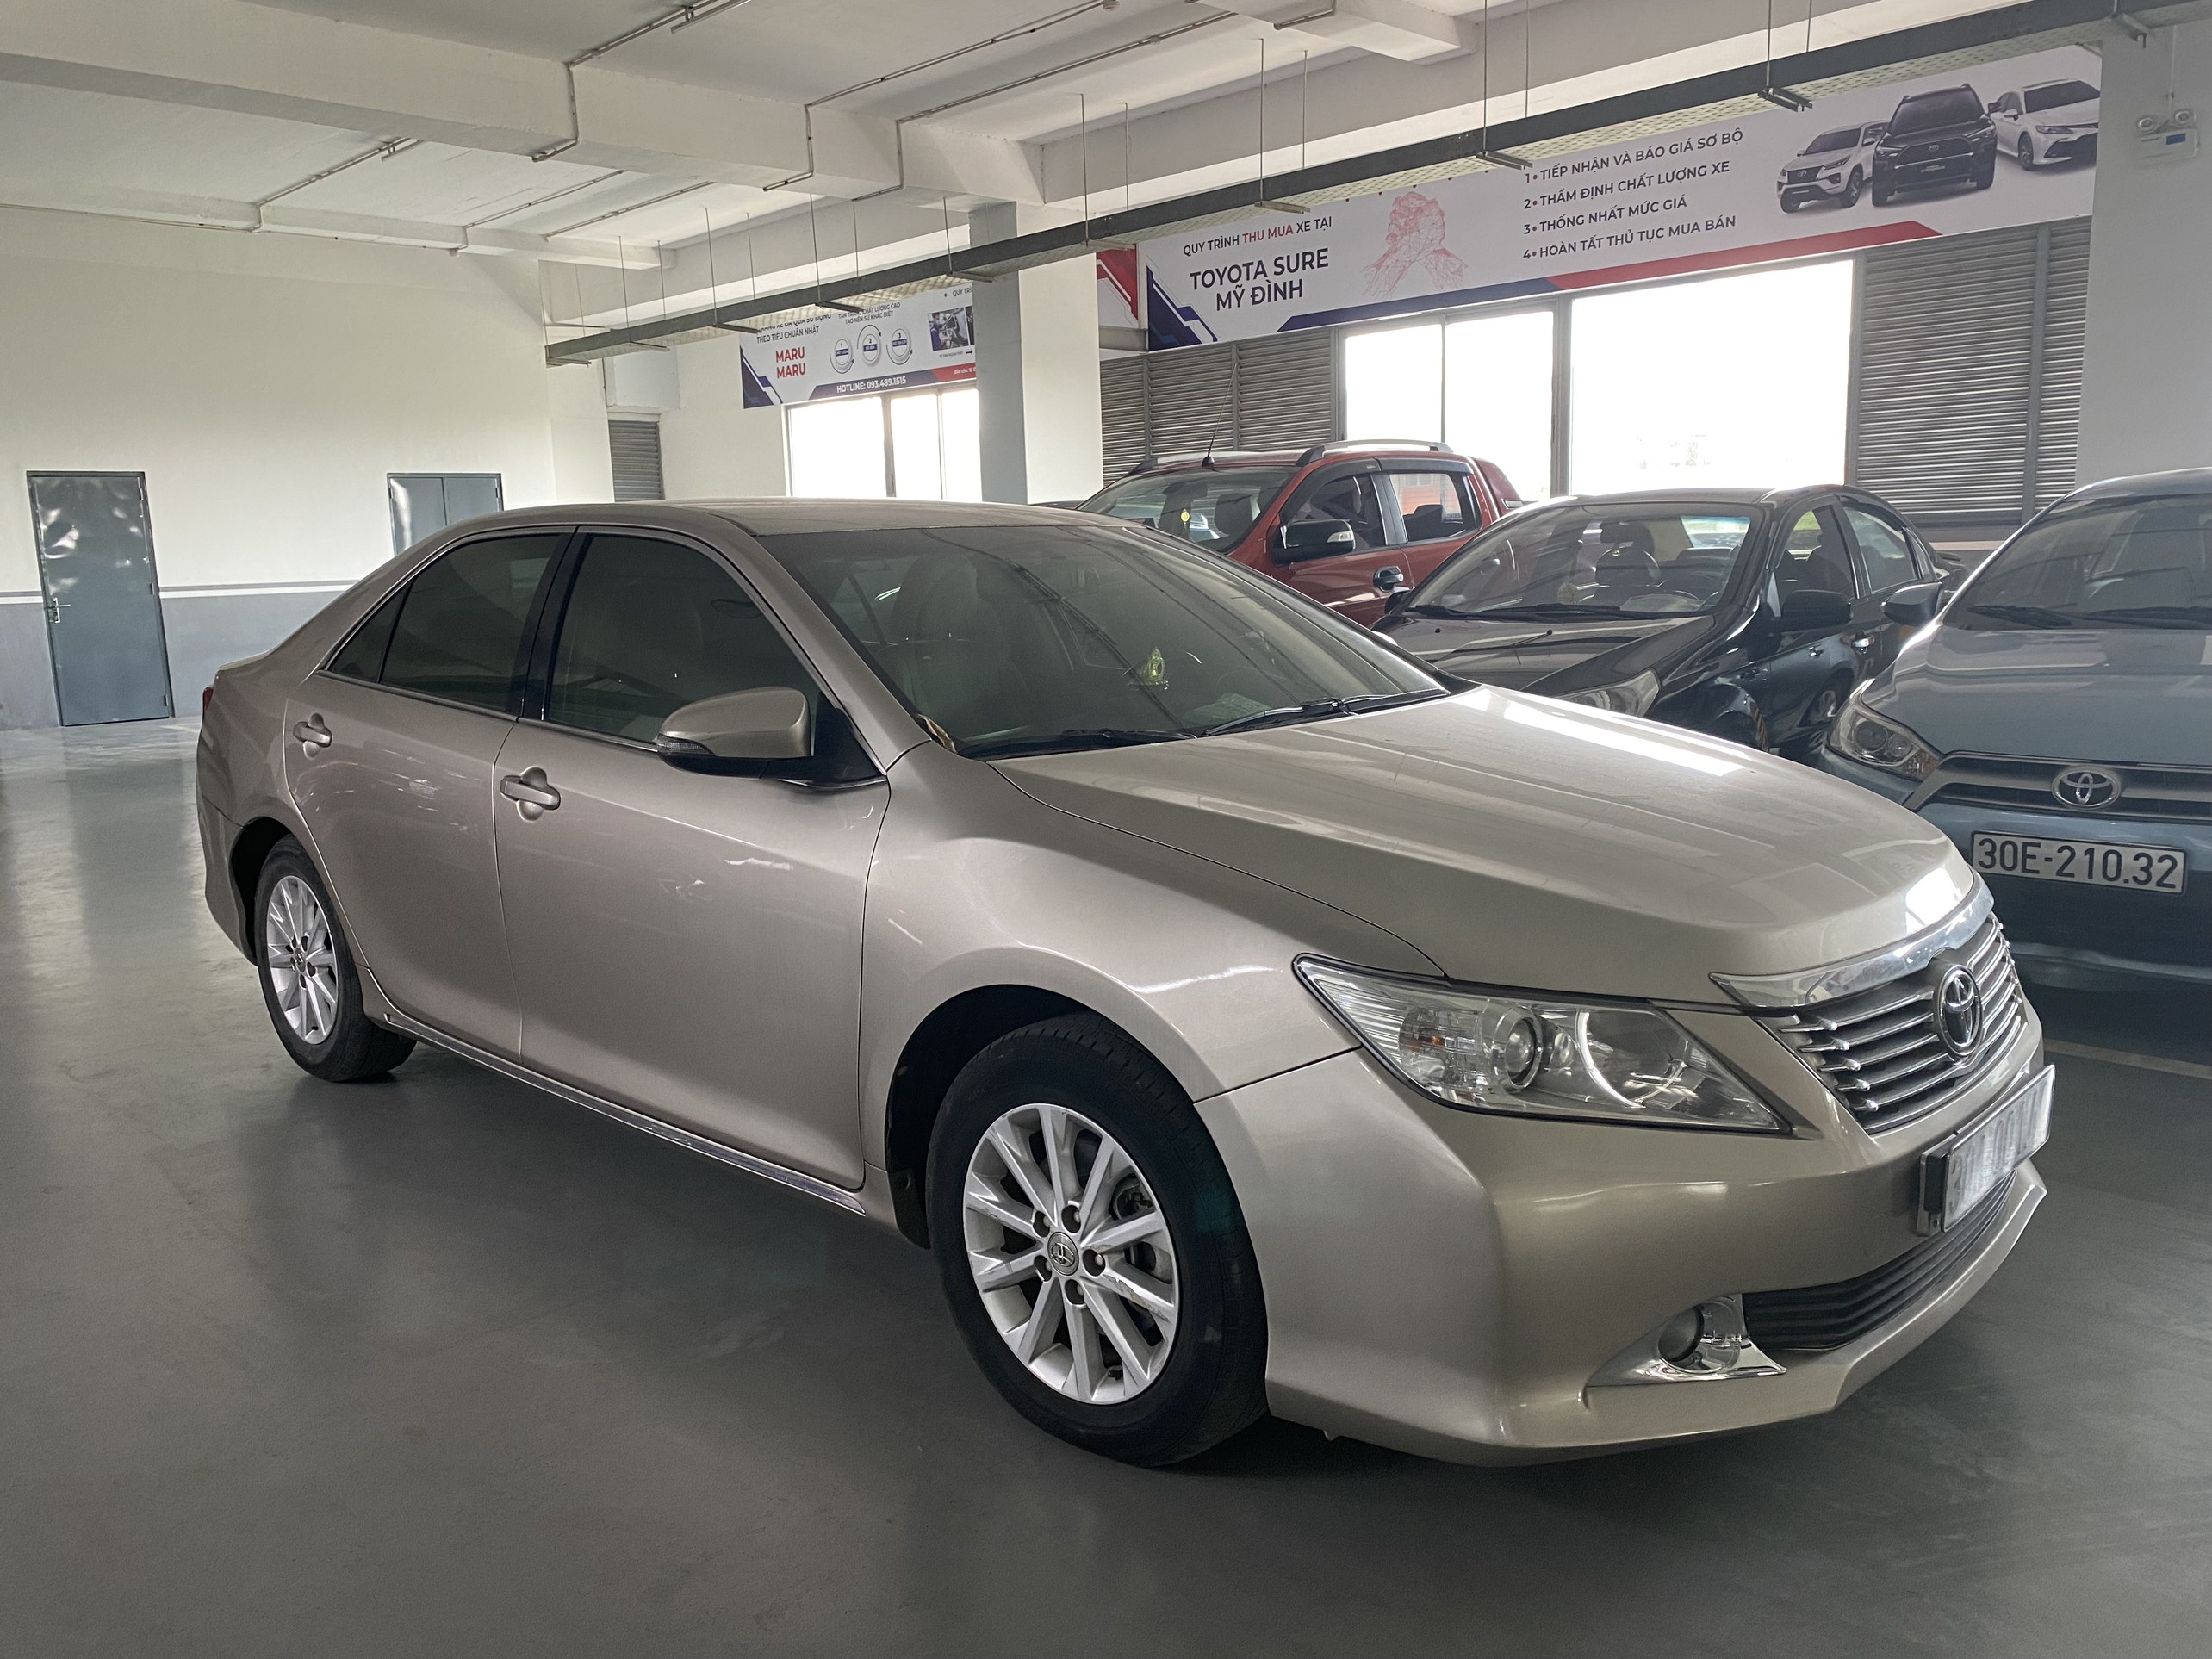 Used 2013 Silver Toyota Camry for 12950